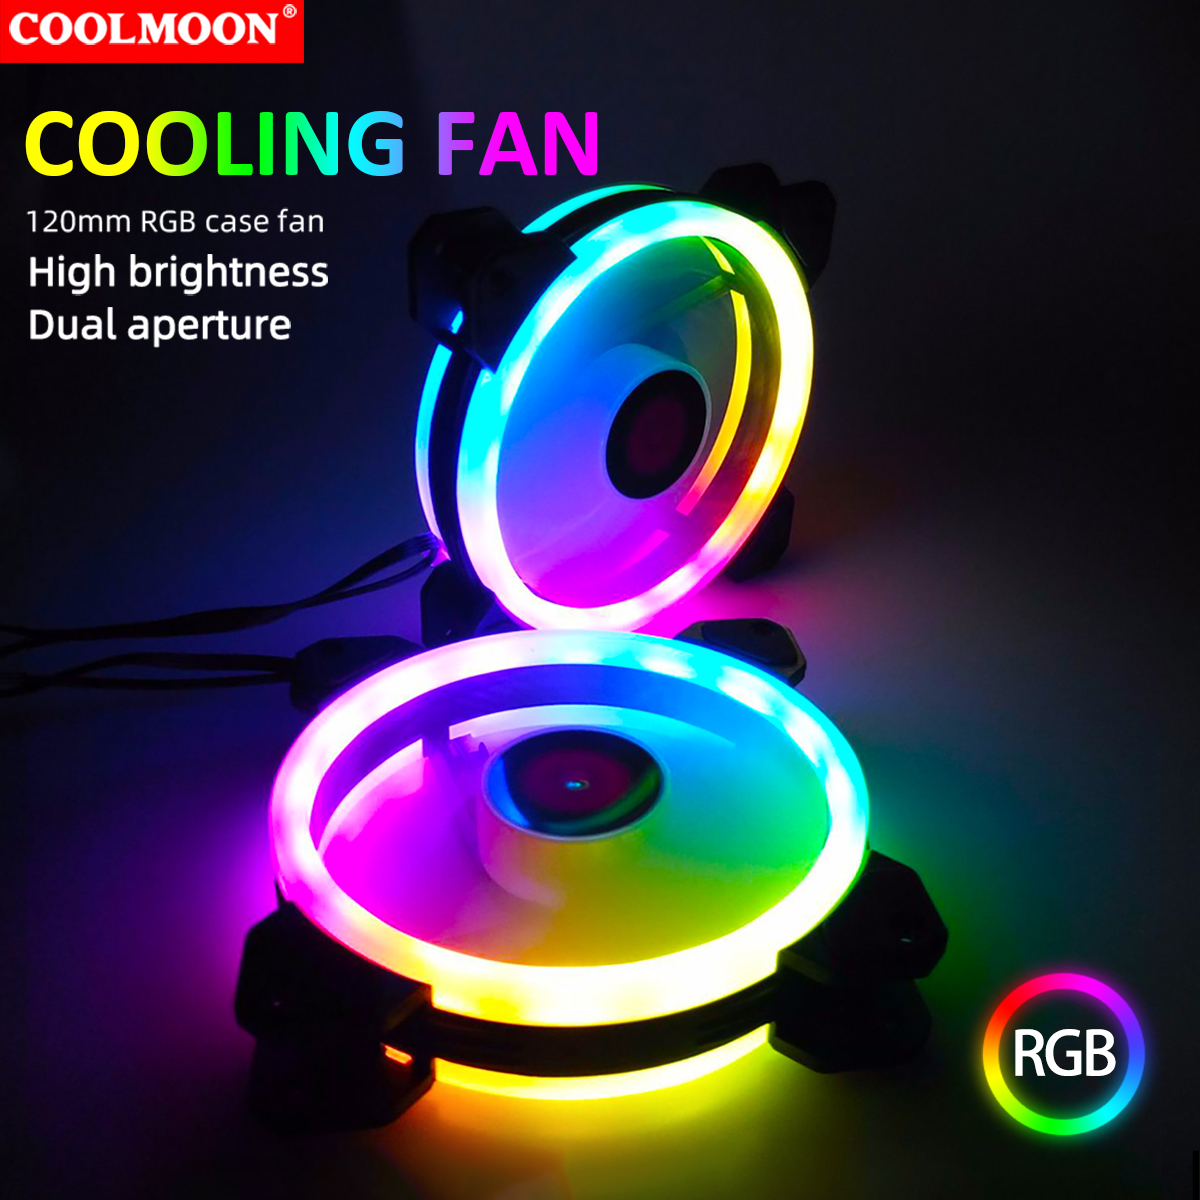 120mm-Computer-PC-Cooler-Cooling-Fan-RGB-LED-Multicolor-mode-Quiet-Chassis-Fan-With-Controller-1940489-1